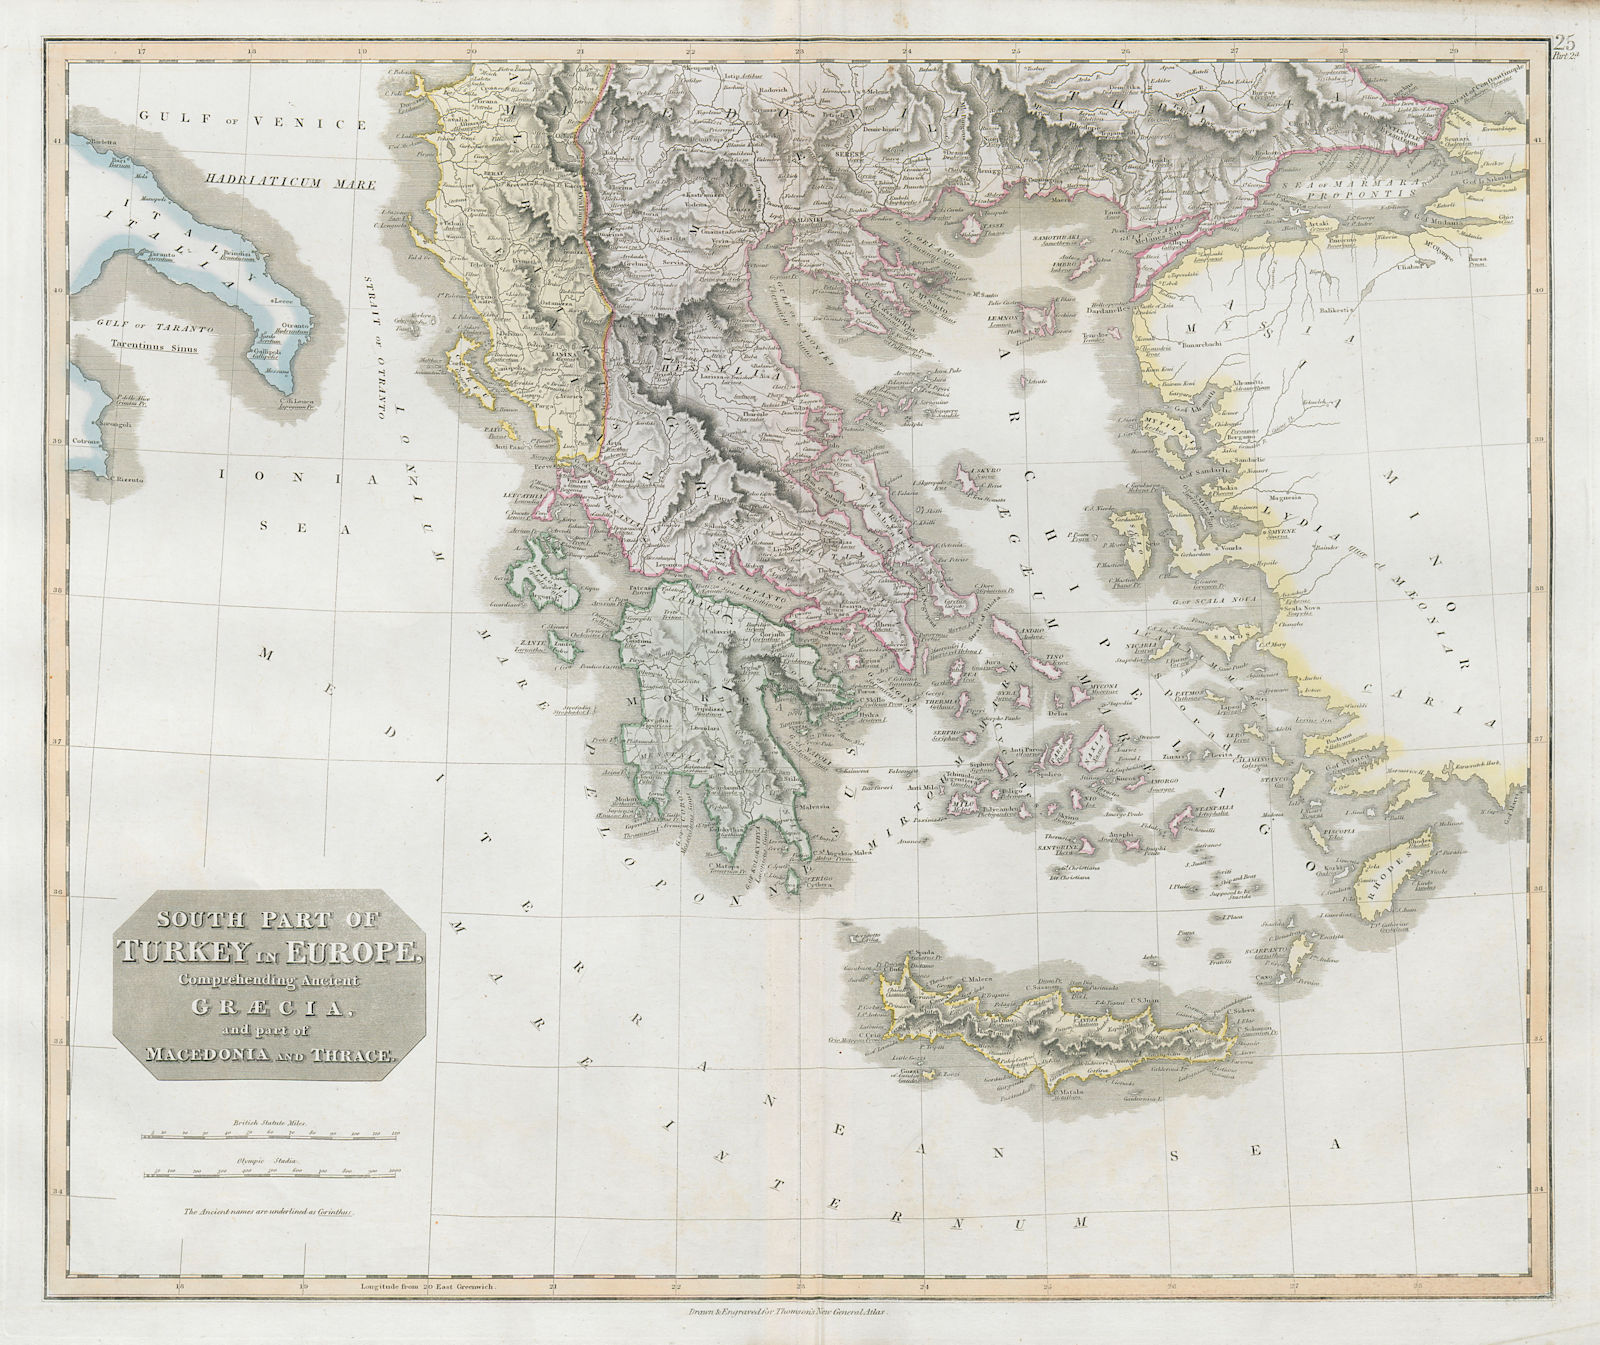 Associate Product South Part of Turkey in Europe. Greece & Aegean. Albania. THOMSON 1830 old map